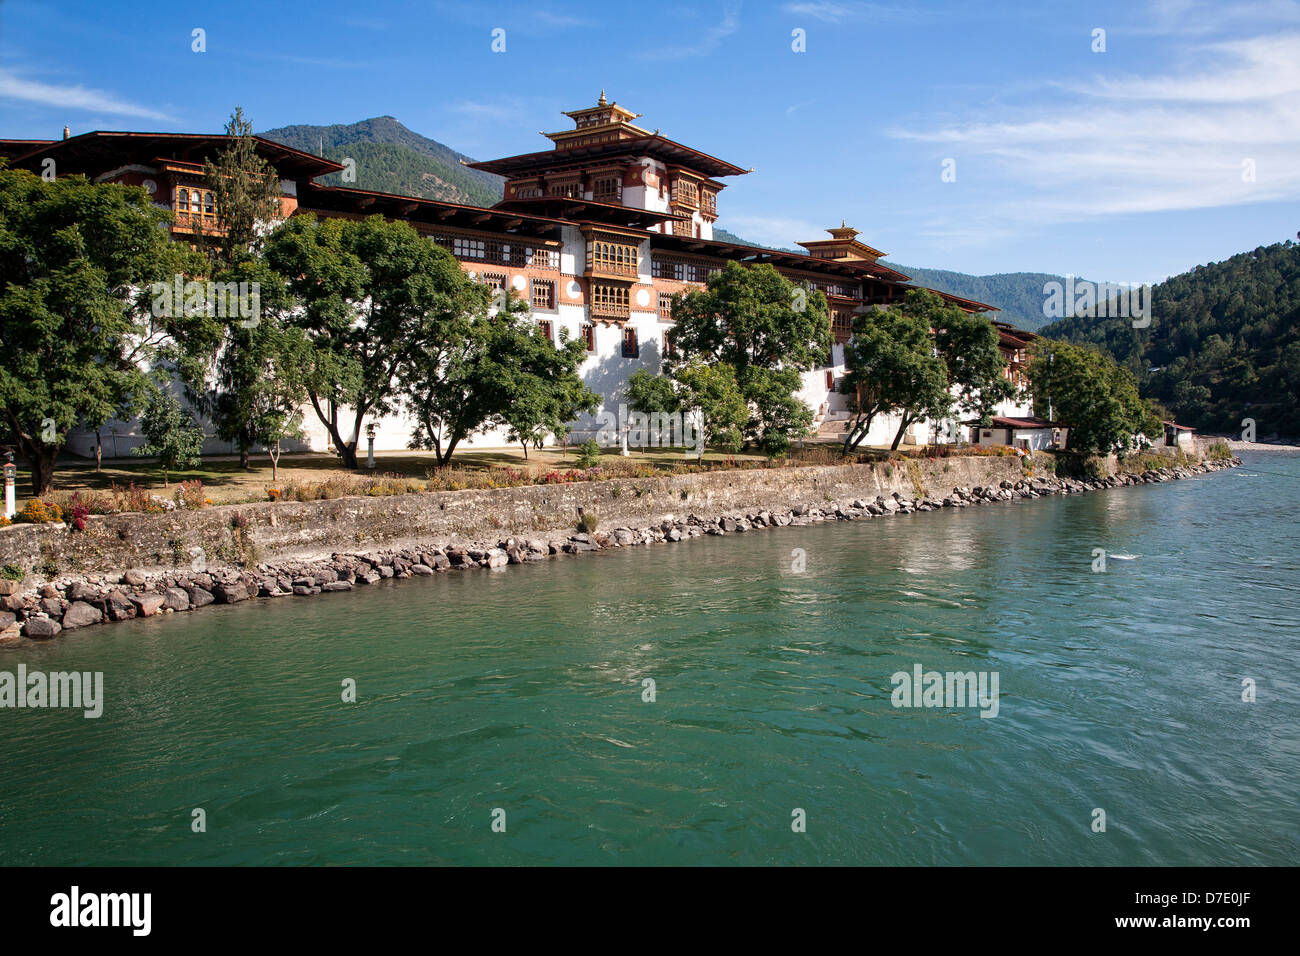 The Punakha Dzong (fortress) at the confluence of the Mo and Pho Chhu (rivers). Bhutan. Stock Photo